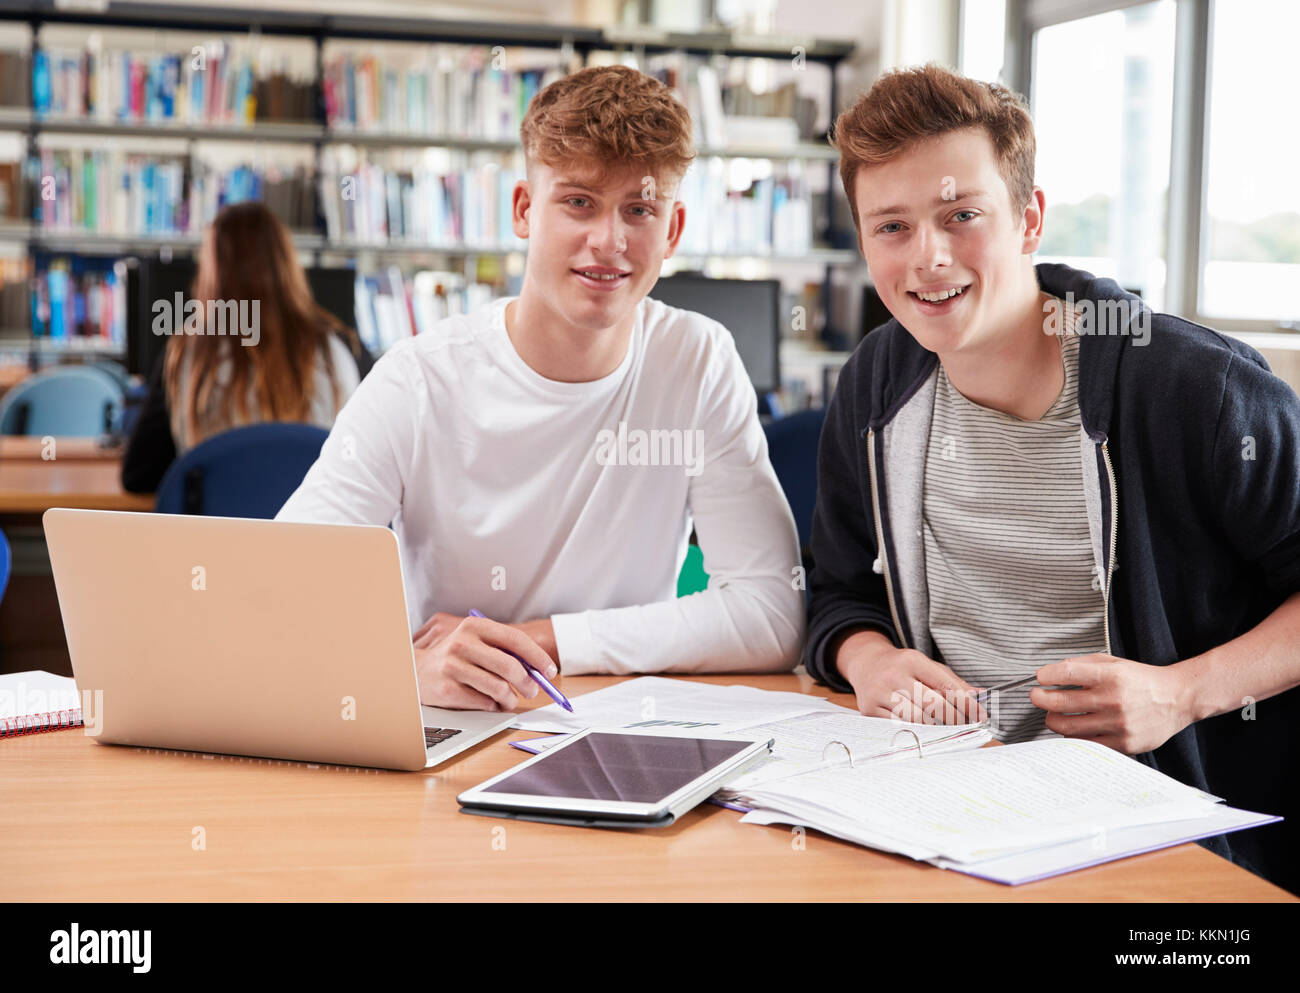 Two Male College Students Collaborating On Project In Library Stock Photo